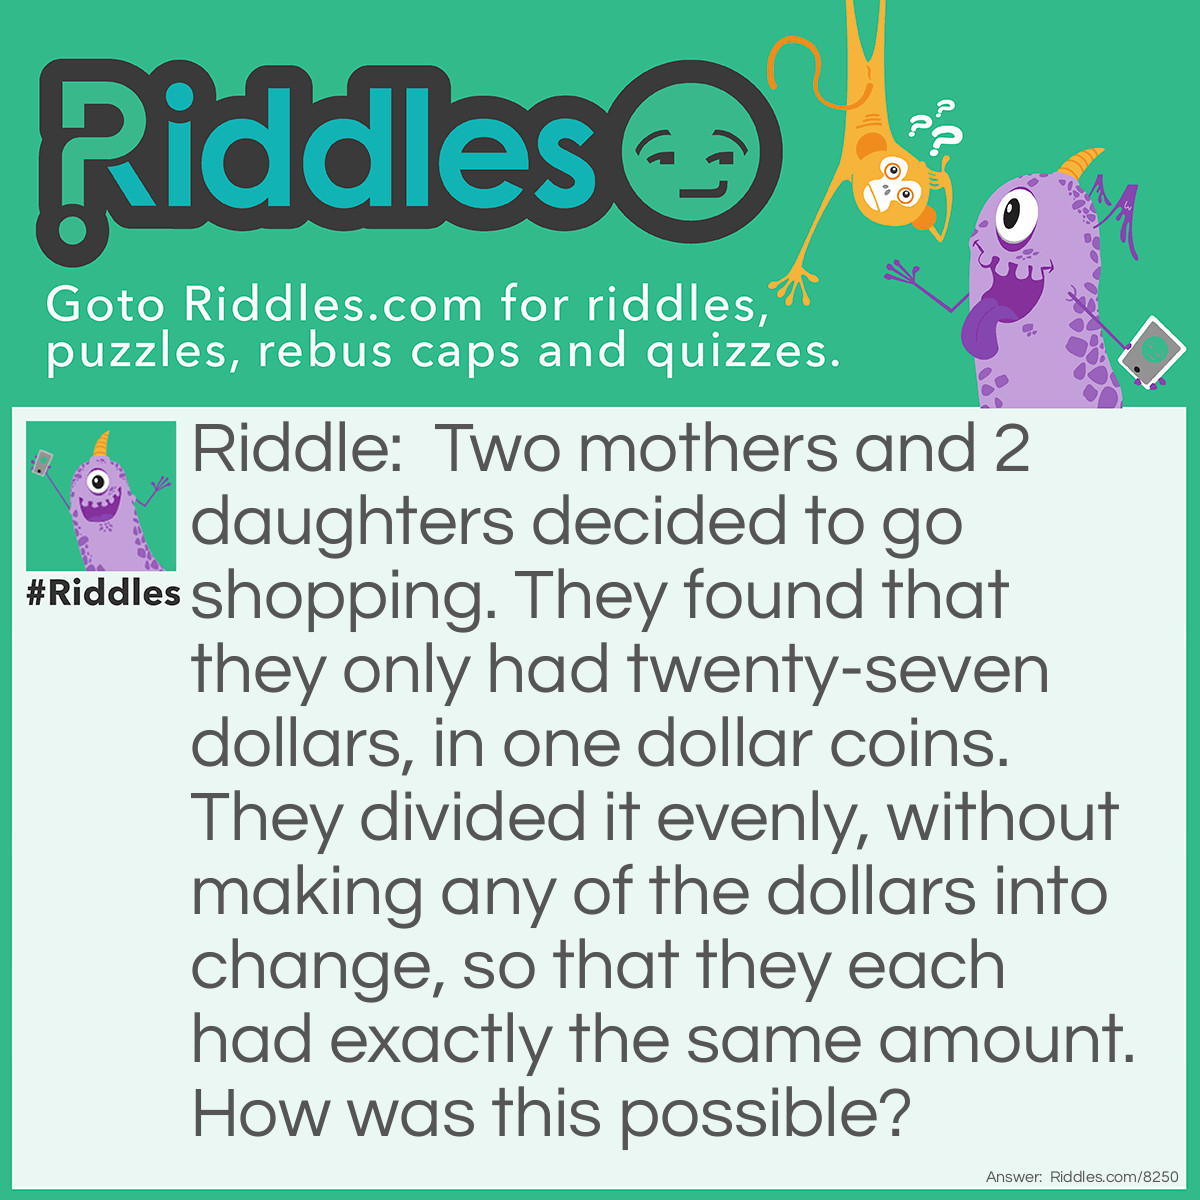 Riddle: Two mothers and 2 daughters decided to go shopping. They found that they only had twenty-seven dollars, in one dollar coins. They divided it evenly, without making any of the dollars into change, so that they each had exactly the same amount. How was this possible? Answer: The 2 mothers and the 2 daughters = 3 people. There is a grandma, a mum and a child. Overall, 27 divided by 3 = 9. They had $9 each.